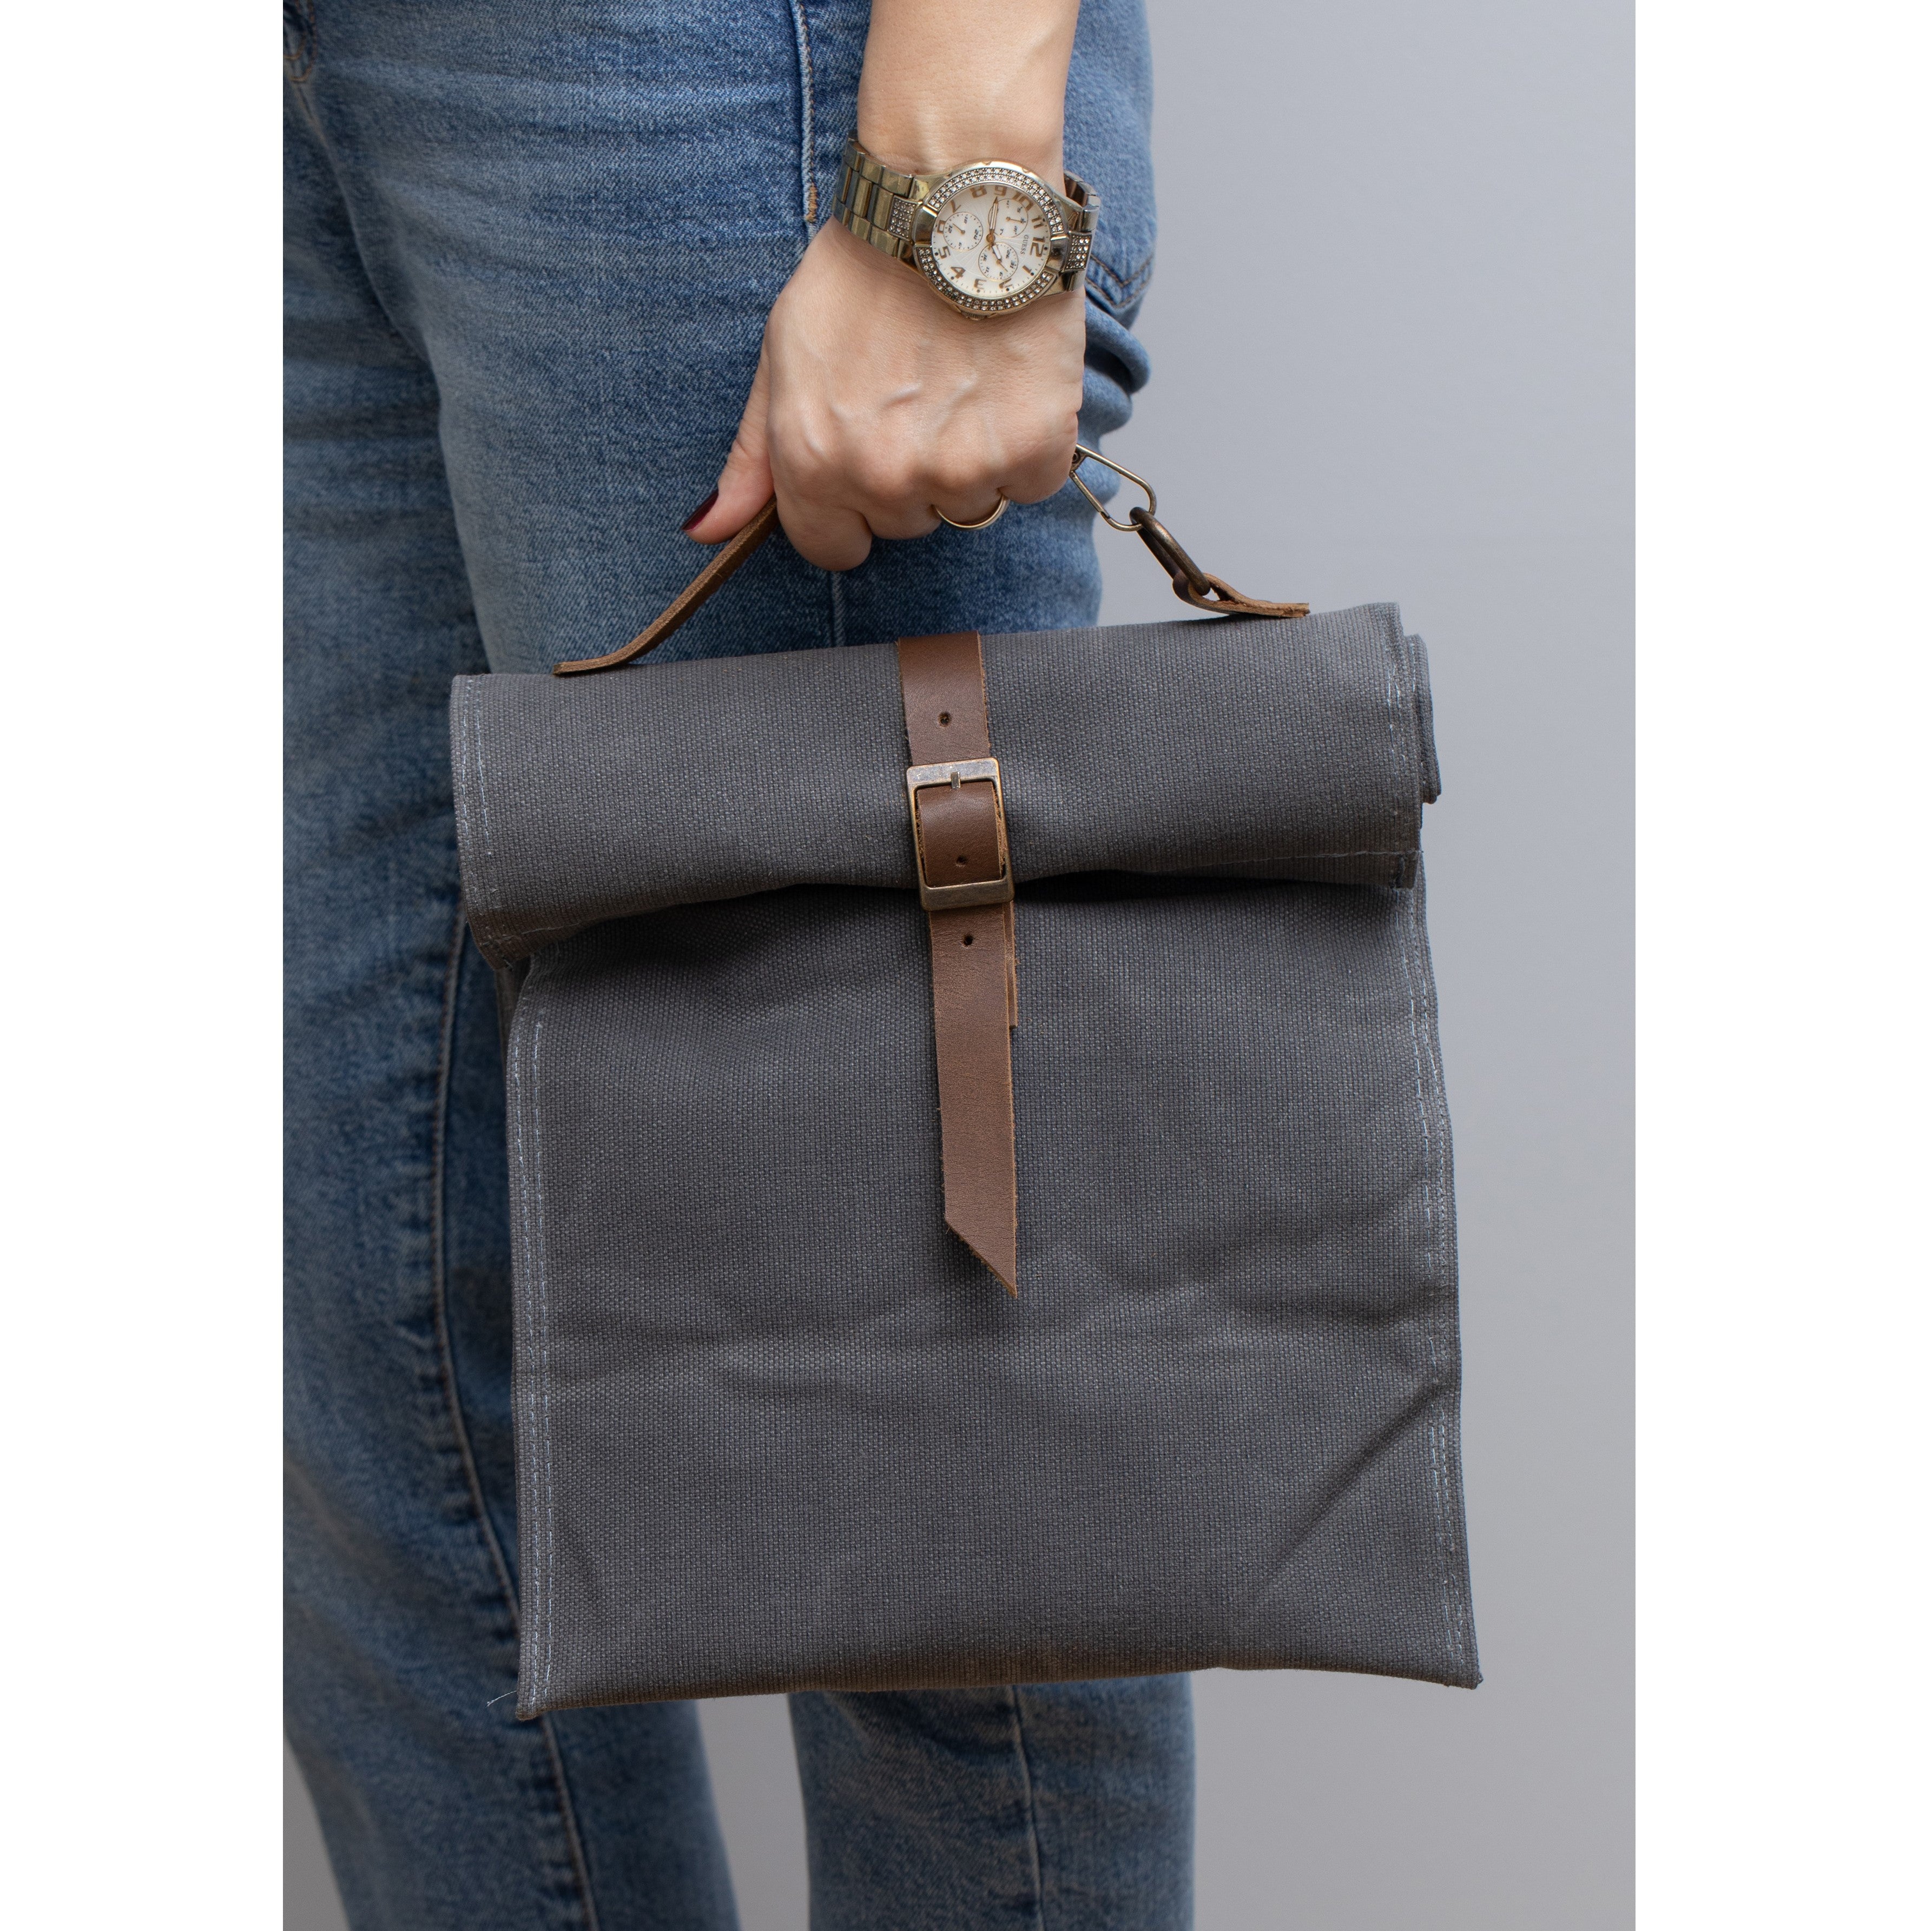 The Original Waxed Canvas Lunch Bag, Handmade with Certified Organic Cotton  and Hand Waxed with Beeswax, Foldable, Stiff Material, Plastic-Free